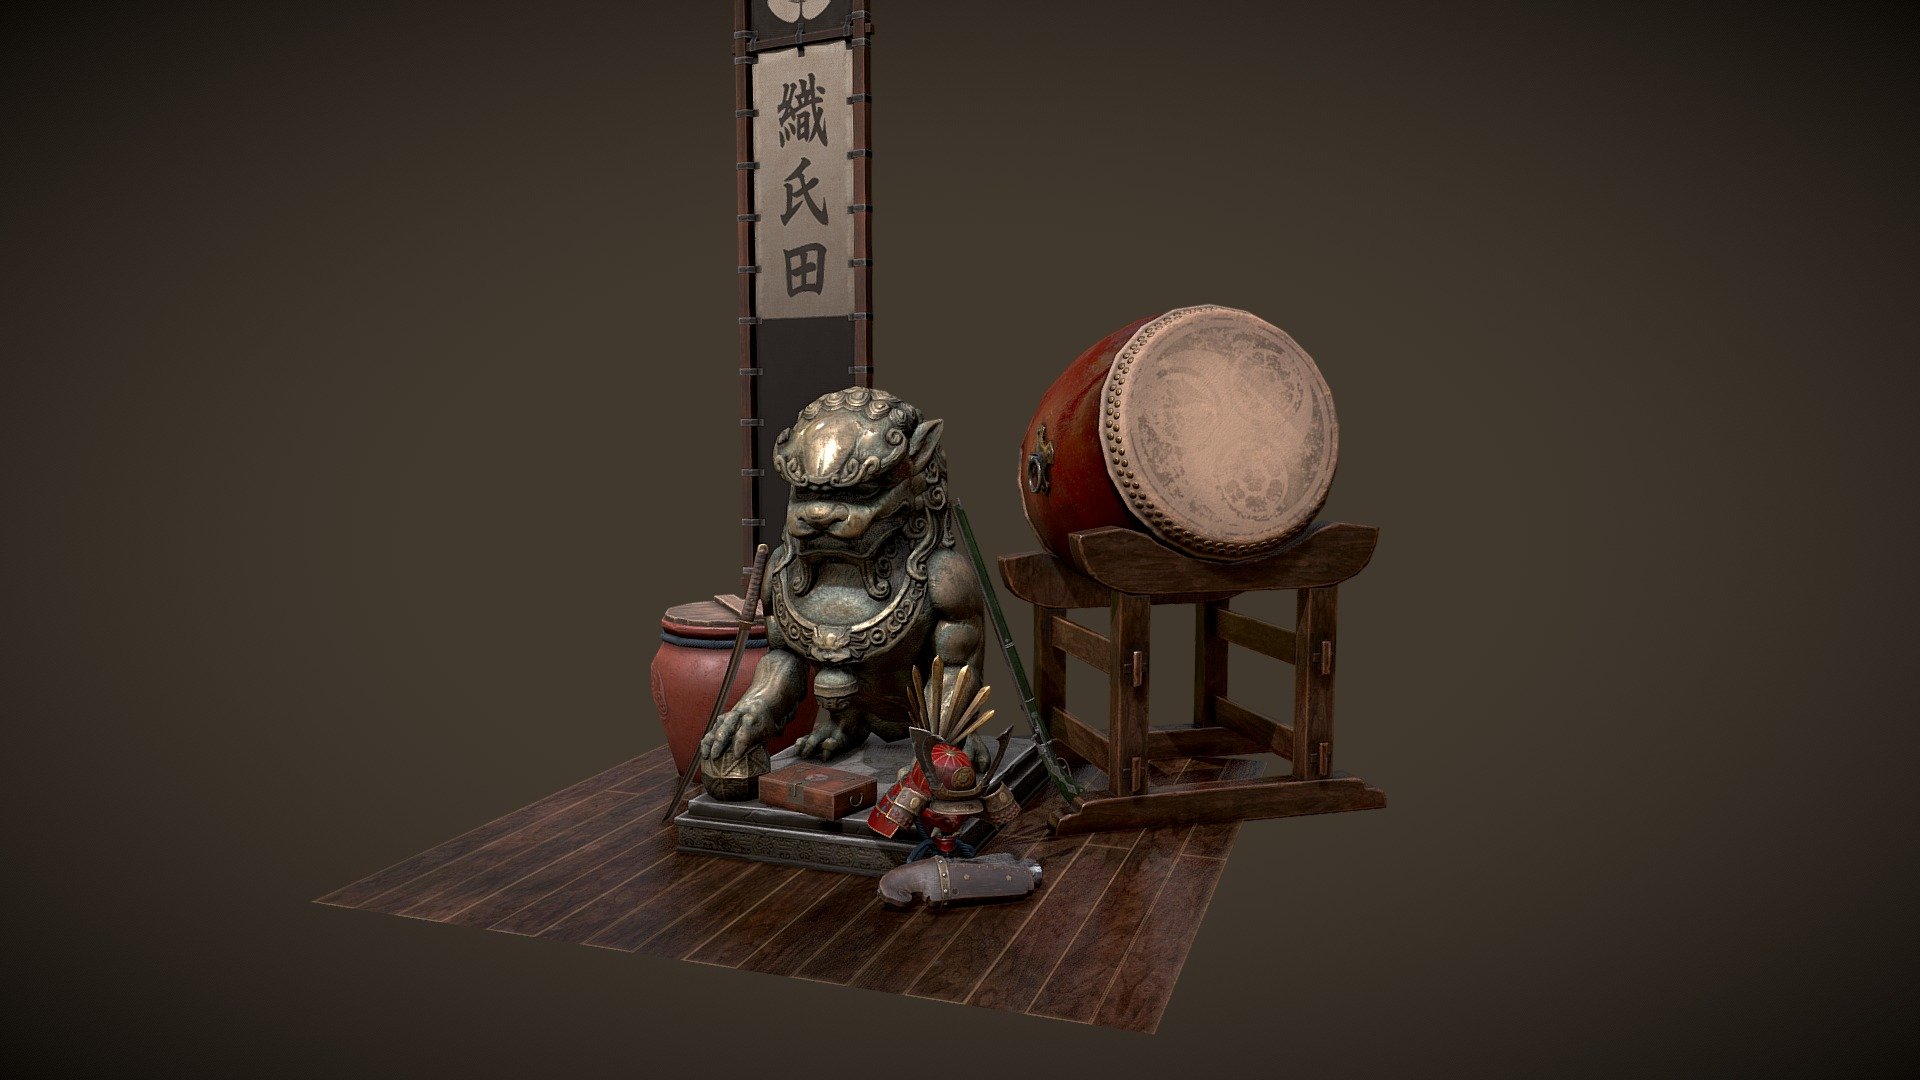 A small selection of assets from my entry to the Artstation Challenge: Feudal Japan.
https://www.artstation.com/contests/feudal-japan/challenges/51/submissions/33078 - FJ Display - 3D model by PaulCarstens 3d model